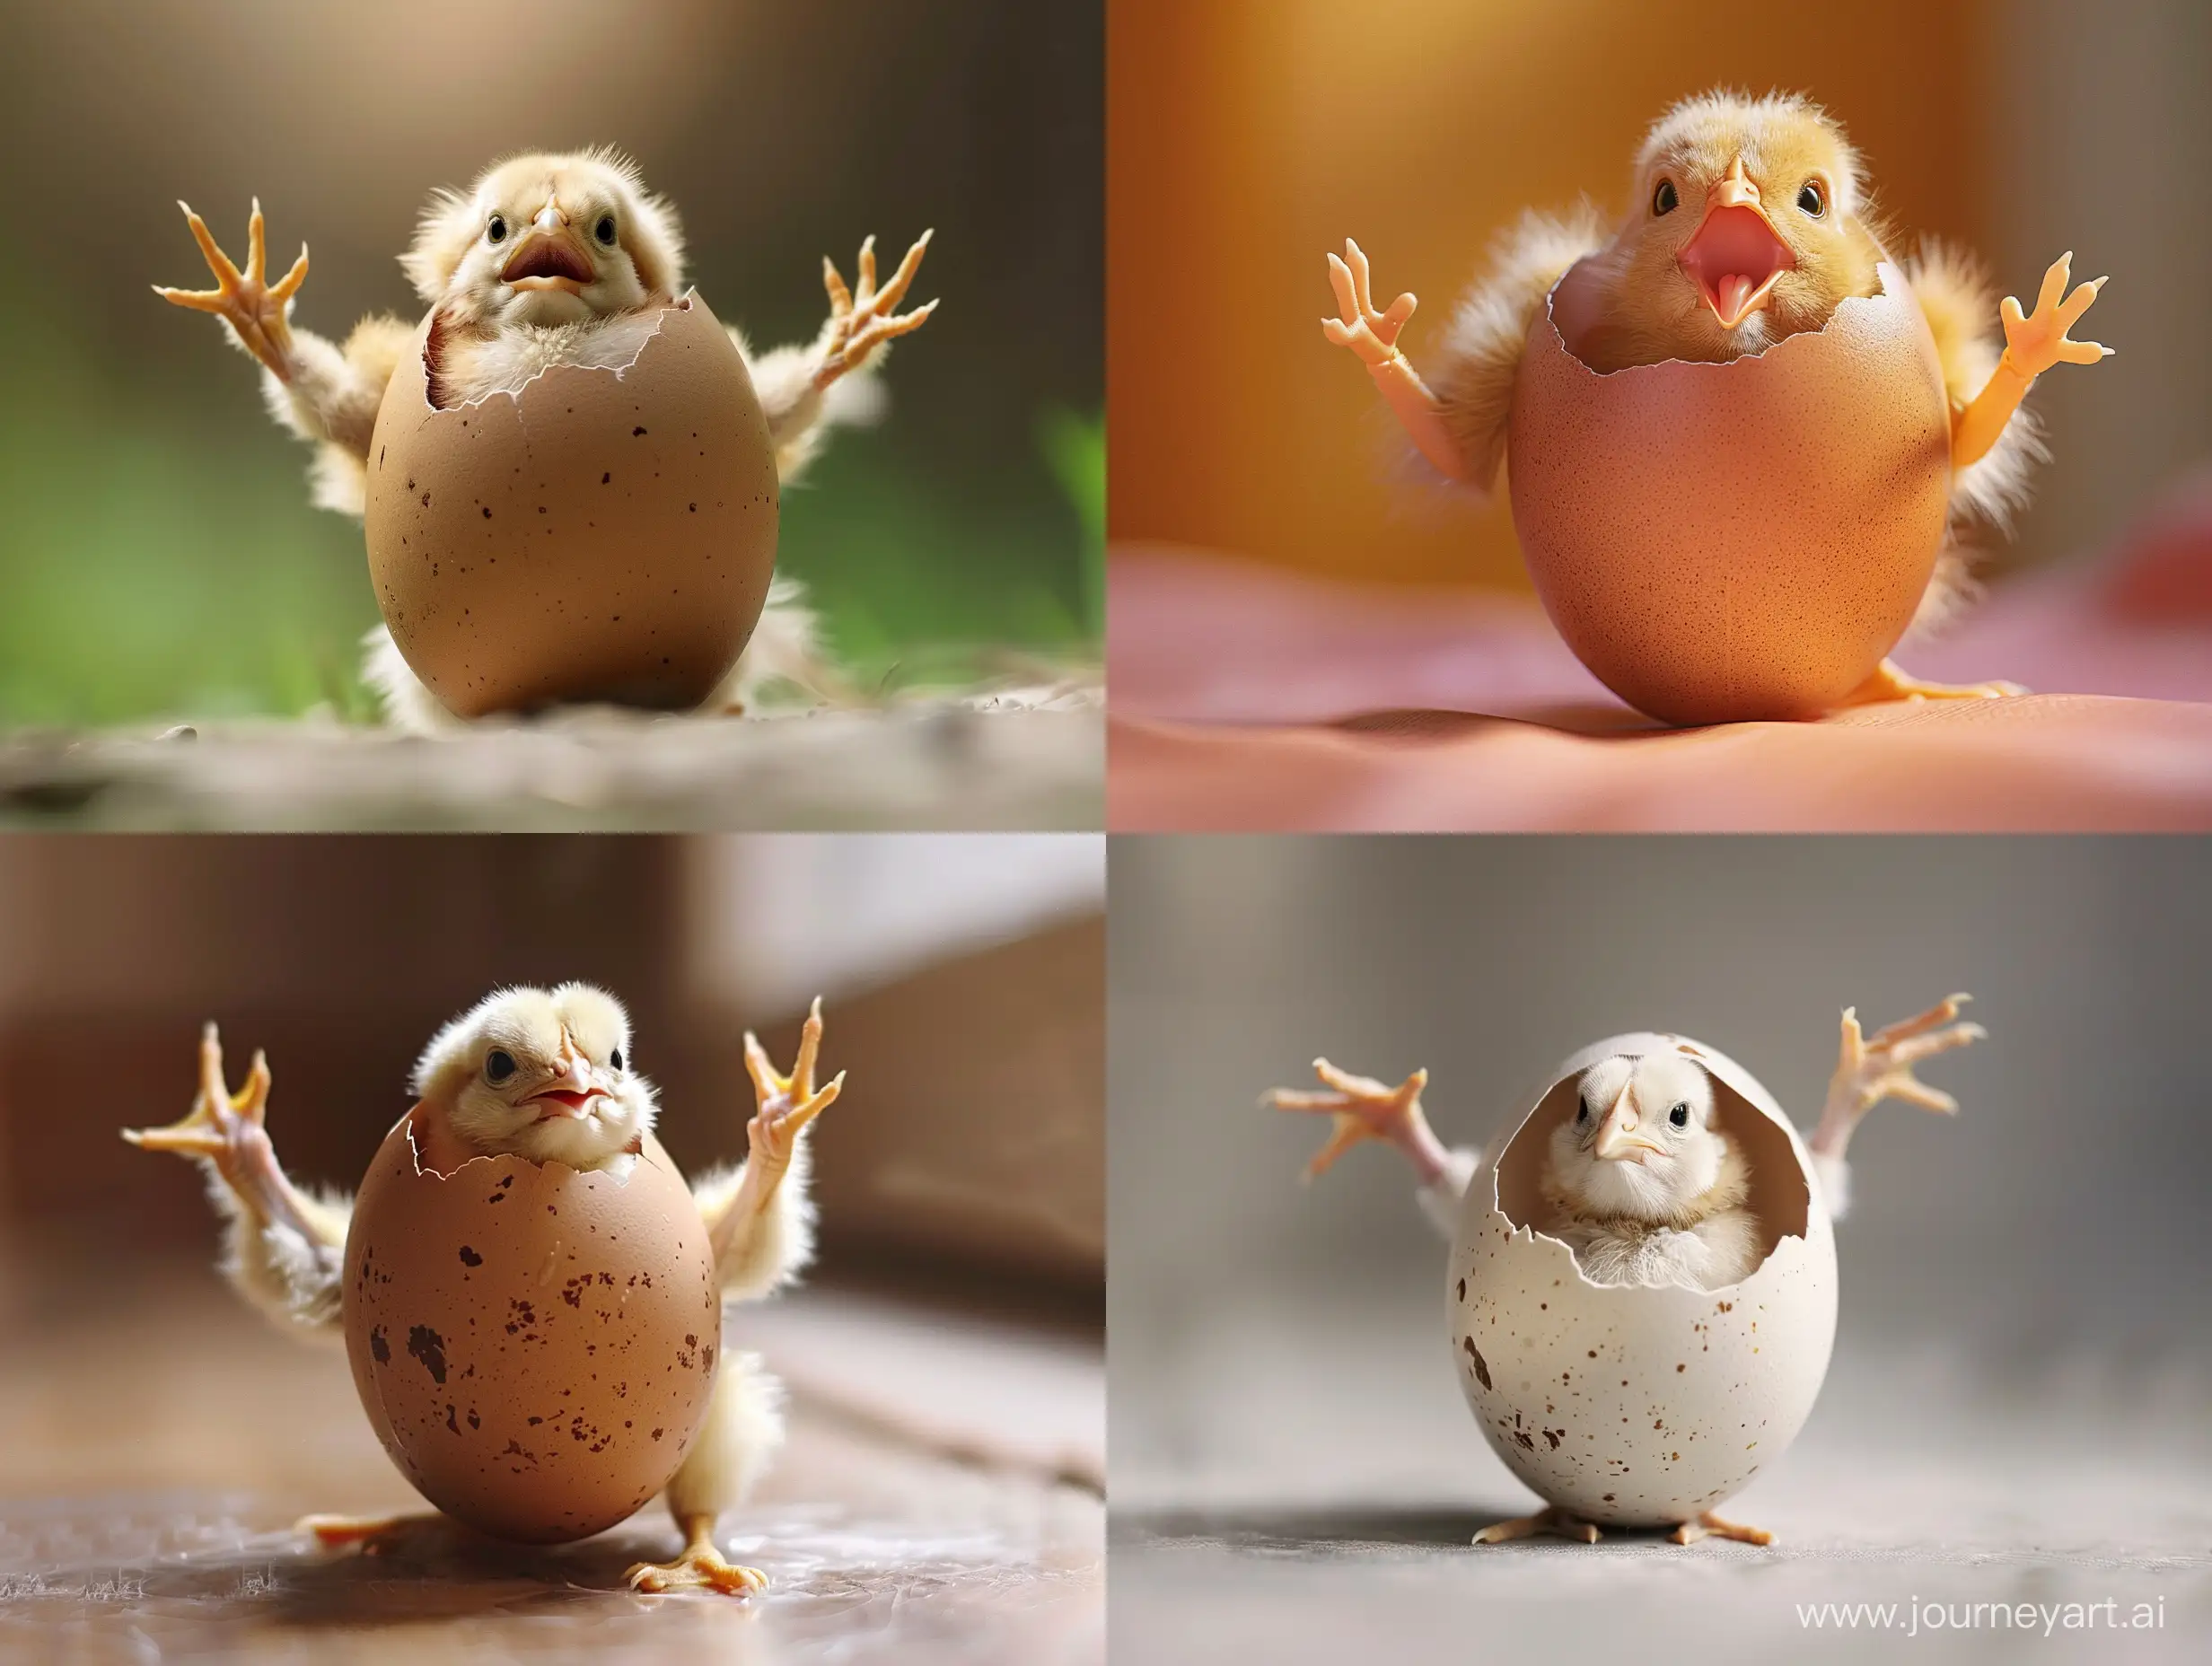 Joyful-Chick-Hatching-from-Egg-with-Raised-Arms